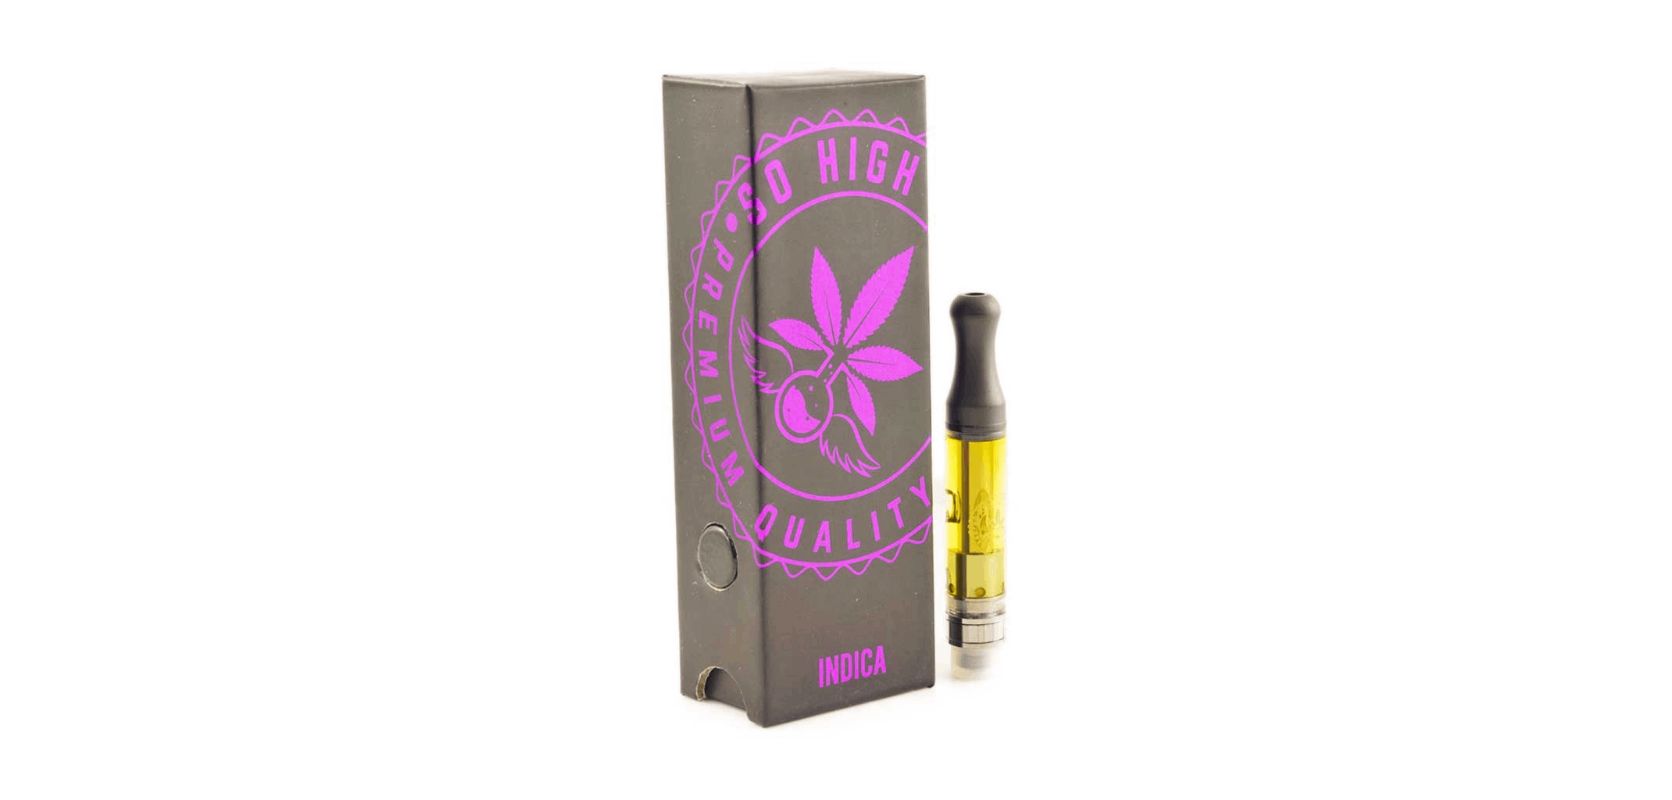 The So High Extracts Premium Vape 1ML THC – Ice Cream Cookies (Indica) will satisfy all of your sweet cravings. According to customer reviews, these taste like freshly baked cookies with a fair dose of vanilla sugar. 